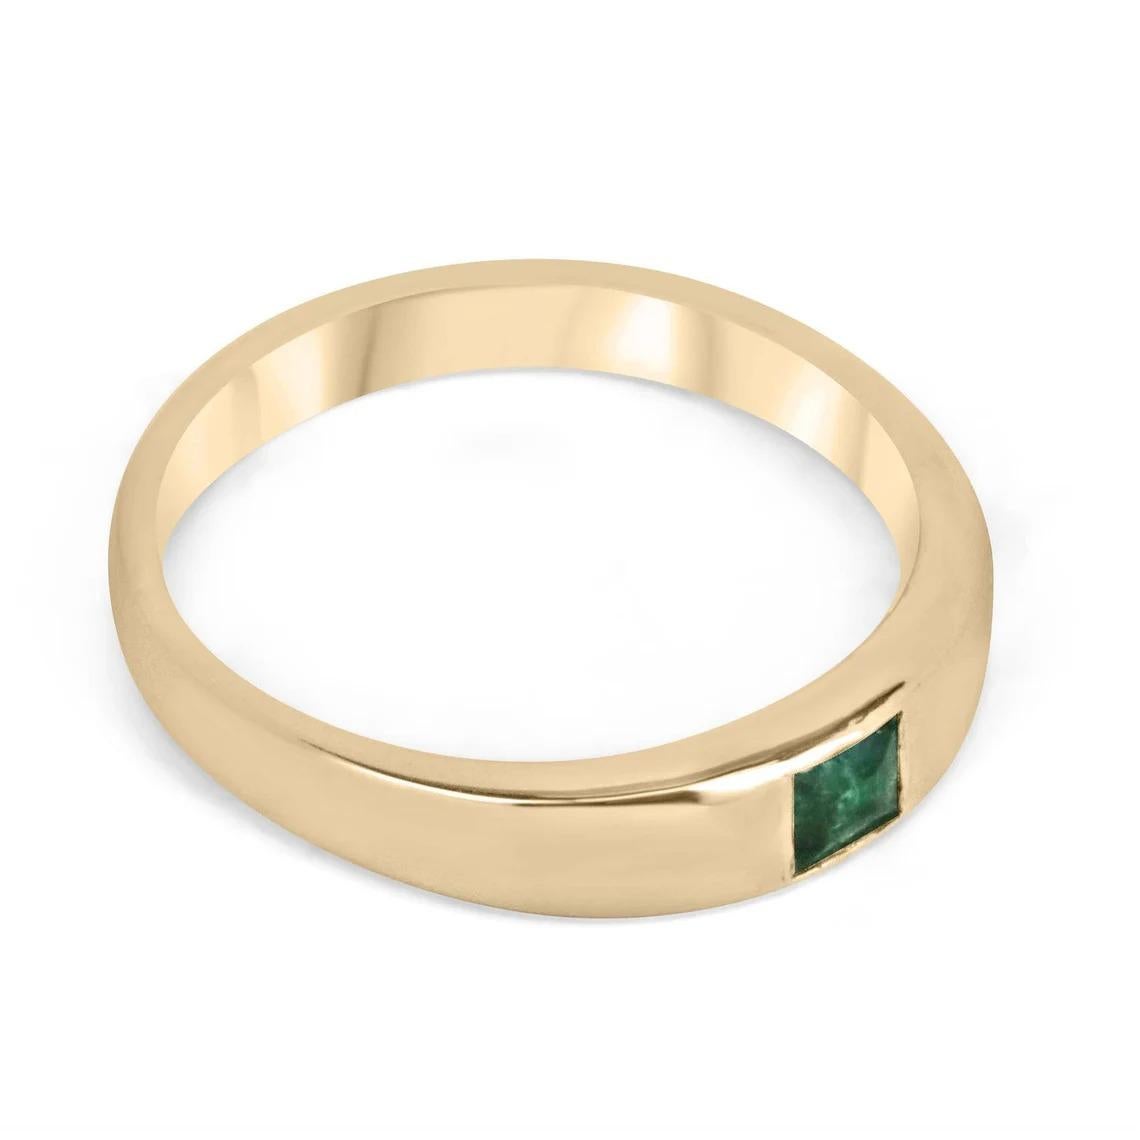 Introducing a striking solitaire emerald ring that effortlessly blends boldness and elegance. This captivating piece features a 0.40 carat princess cut emerald with a vivid dark green color that commands attention. The emerald's excellent luster